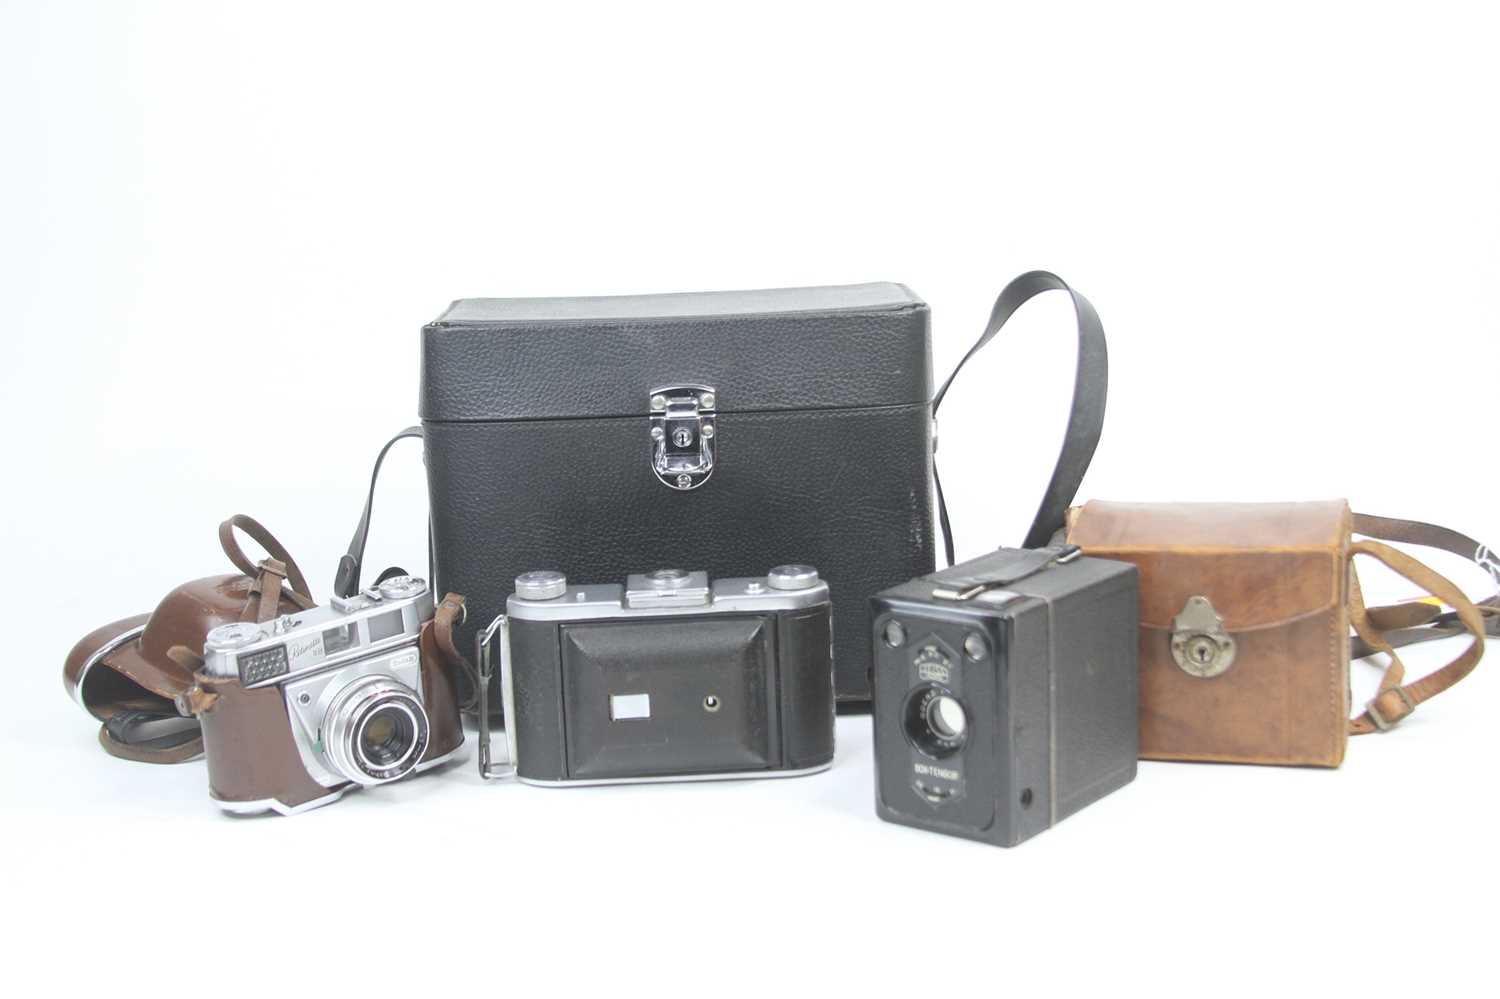 A collection of vintage photography equipment to include a Kodak Retinette SLR camera